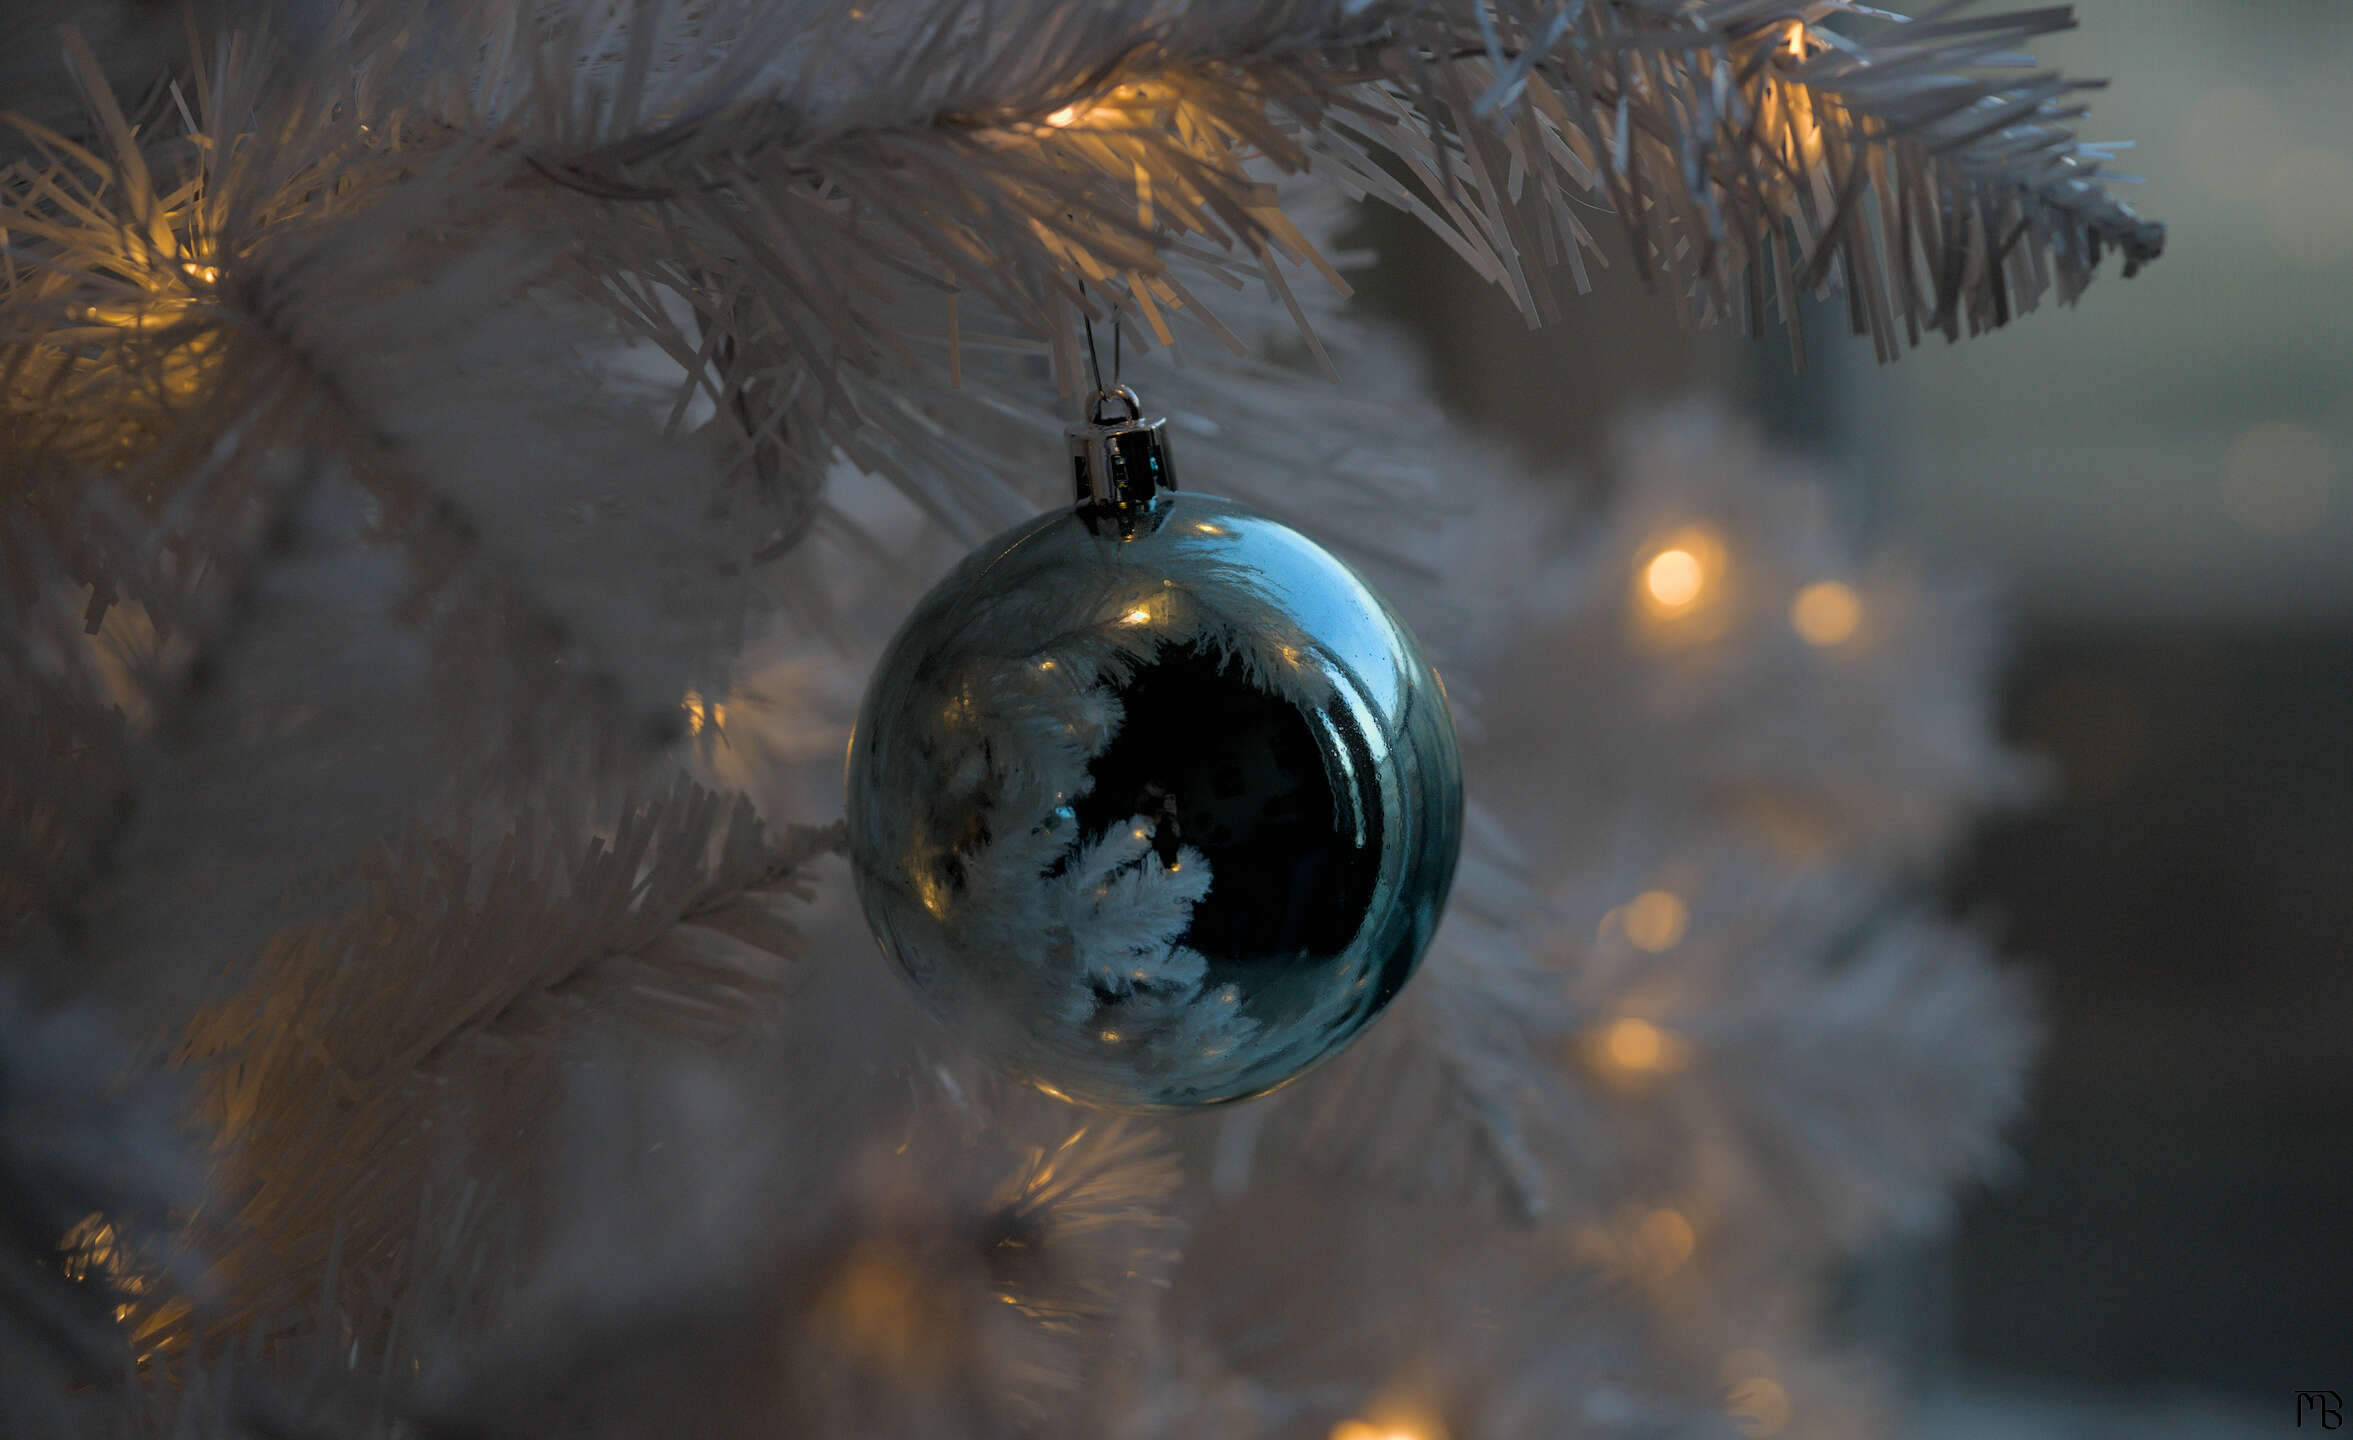 Blue ornament on white tree with lights